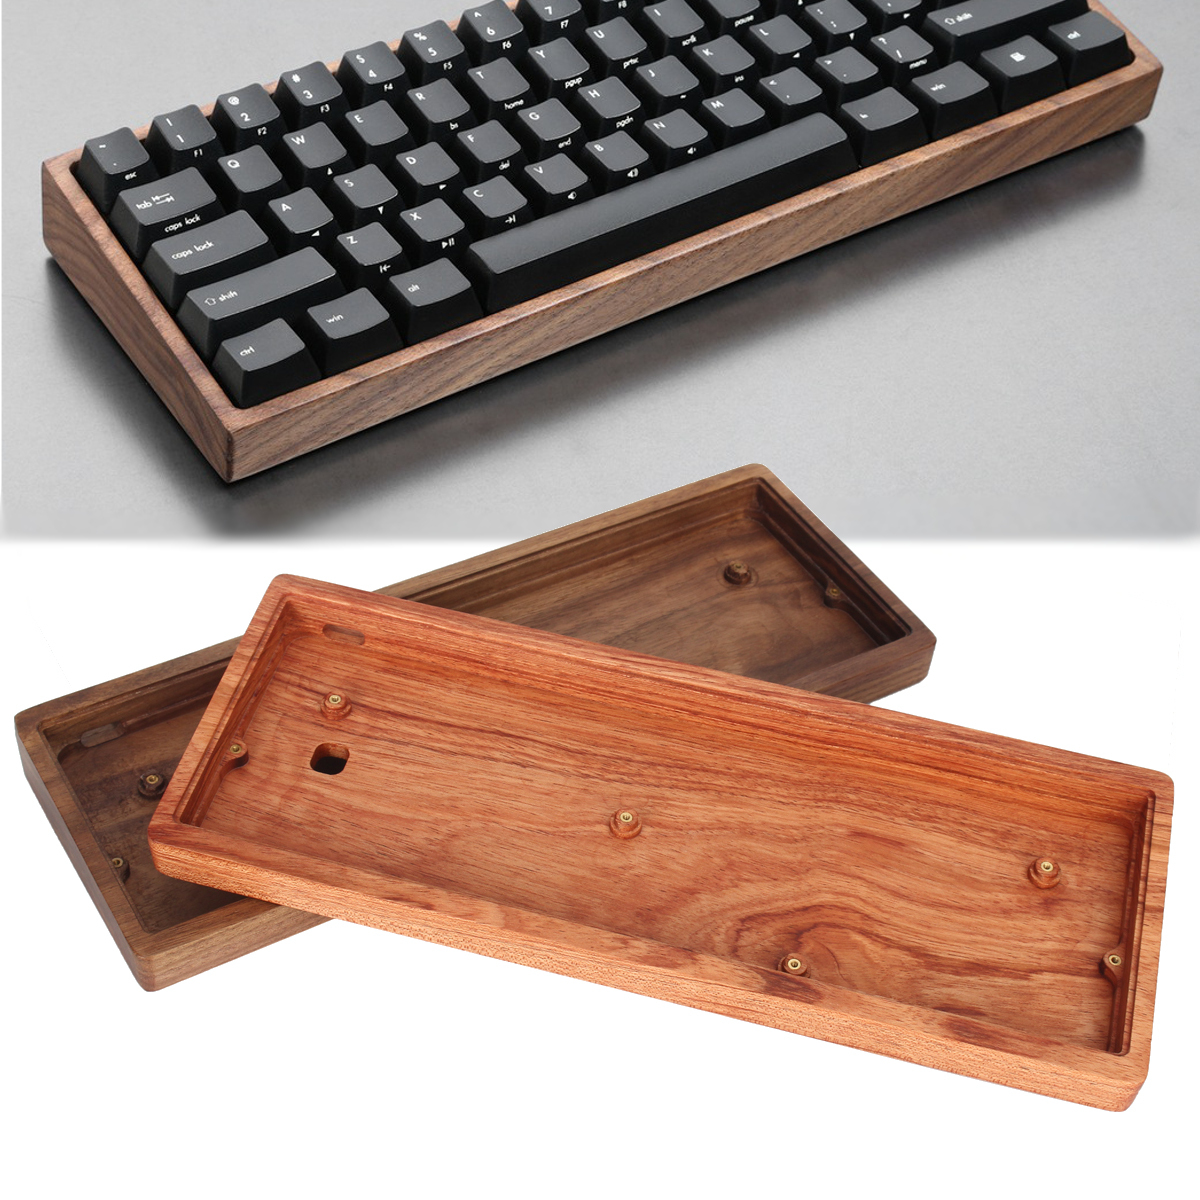 GH60 Solid Wooden Case Customized Shell Base for 60% Mini Mechanical Gaming Keyboard 2